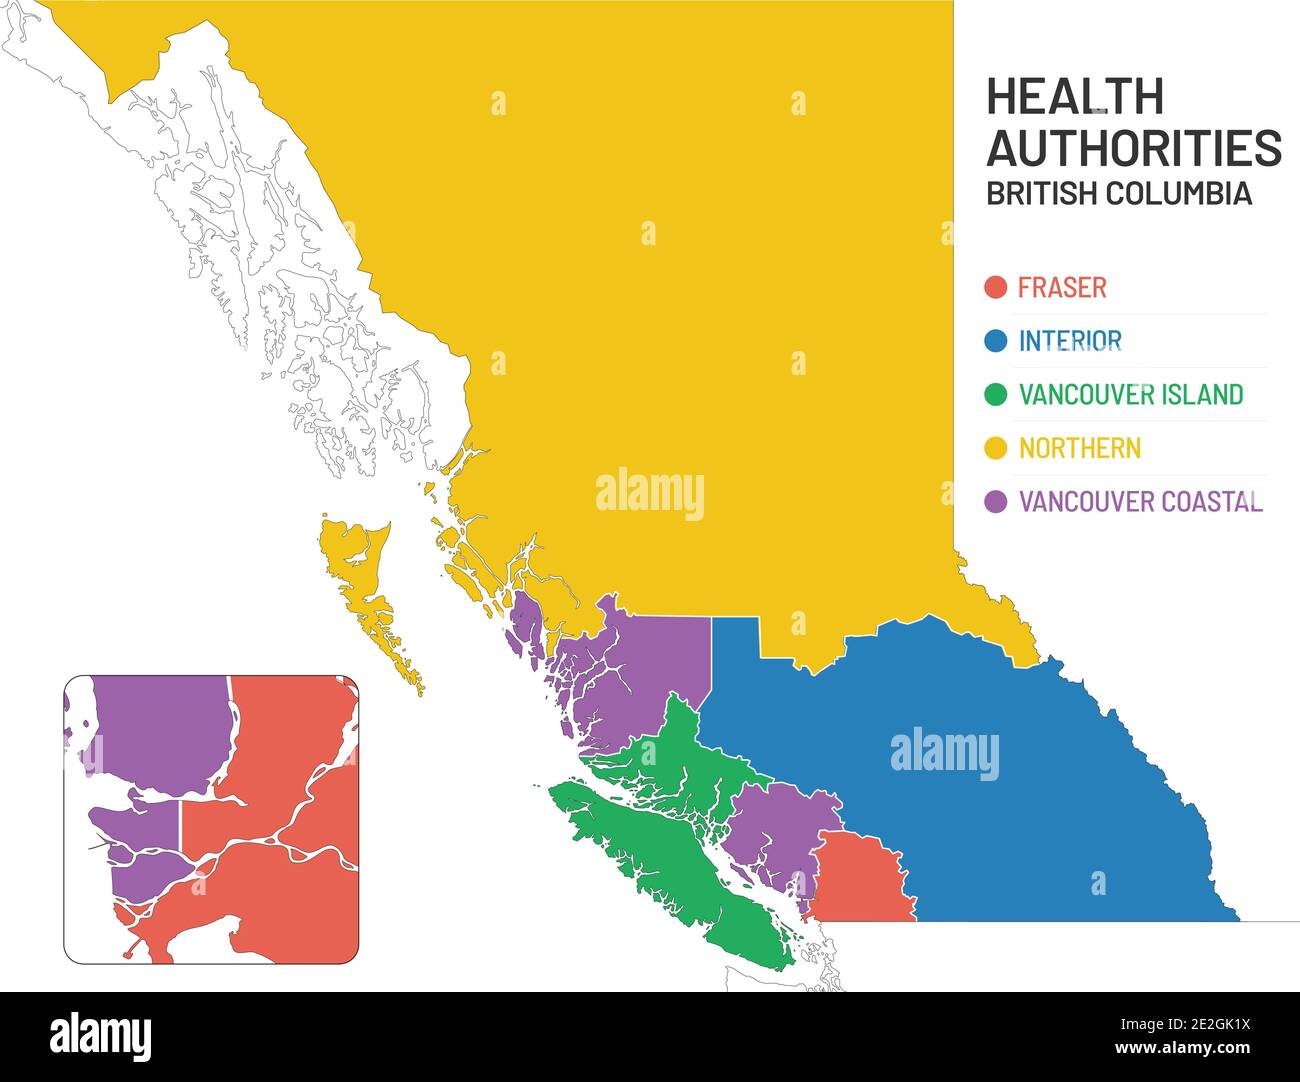 British Columbia health authorities map. Simple map of BC Canada illustrating and naming the health boundary for each health authority region. Stock Vector